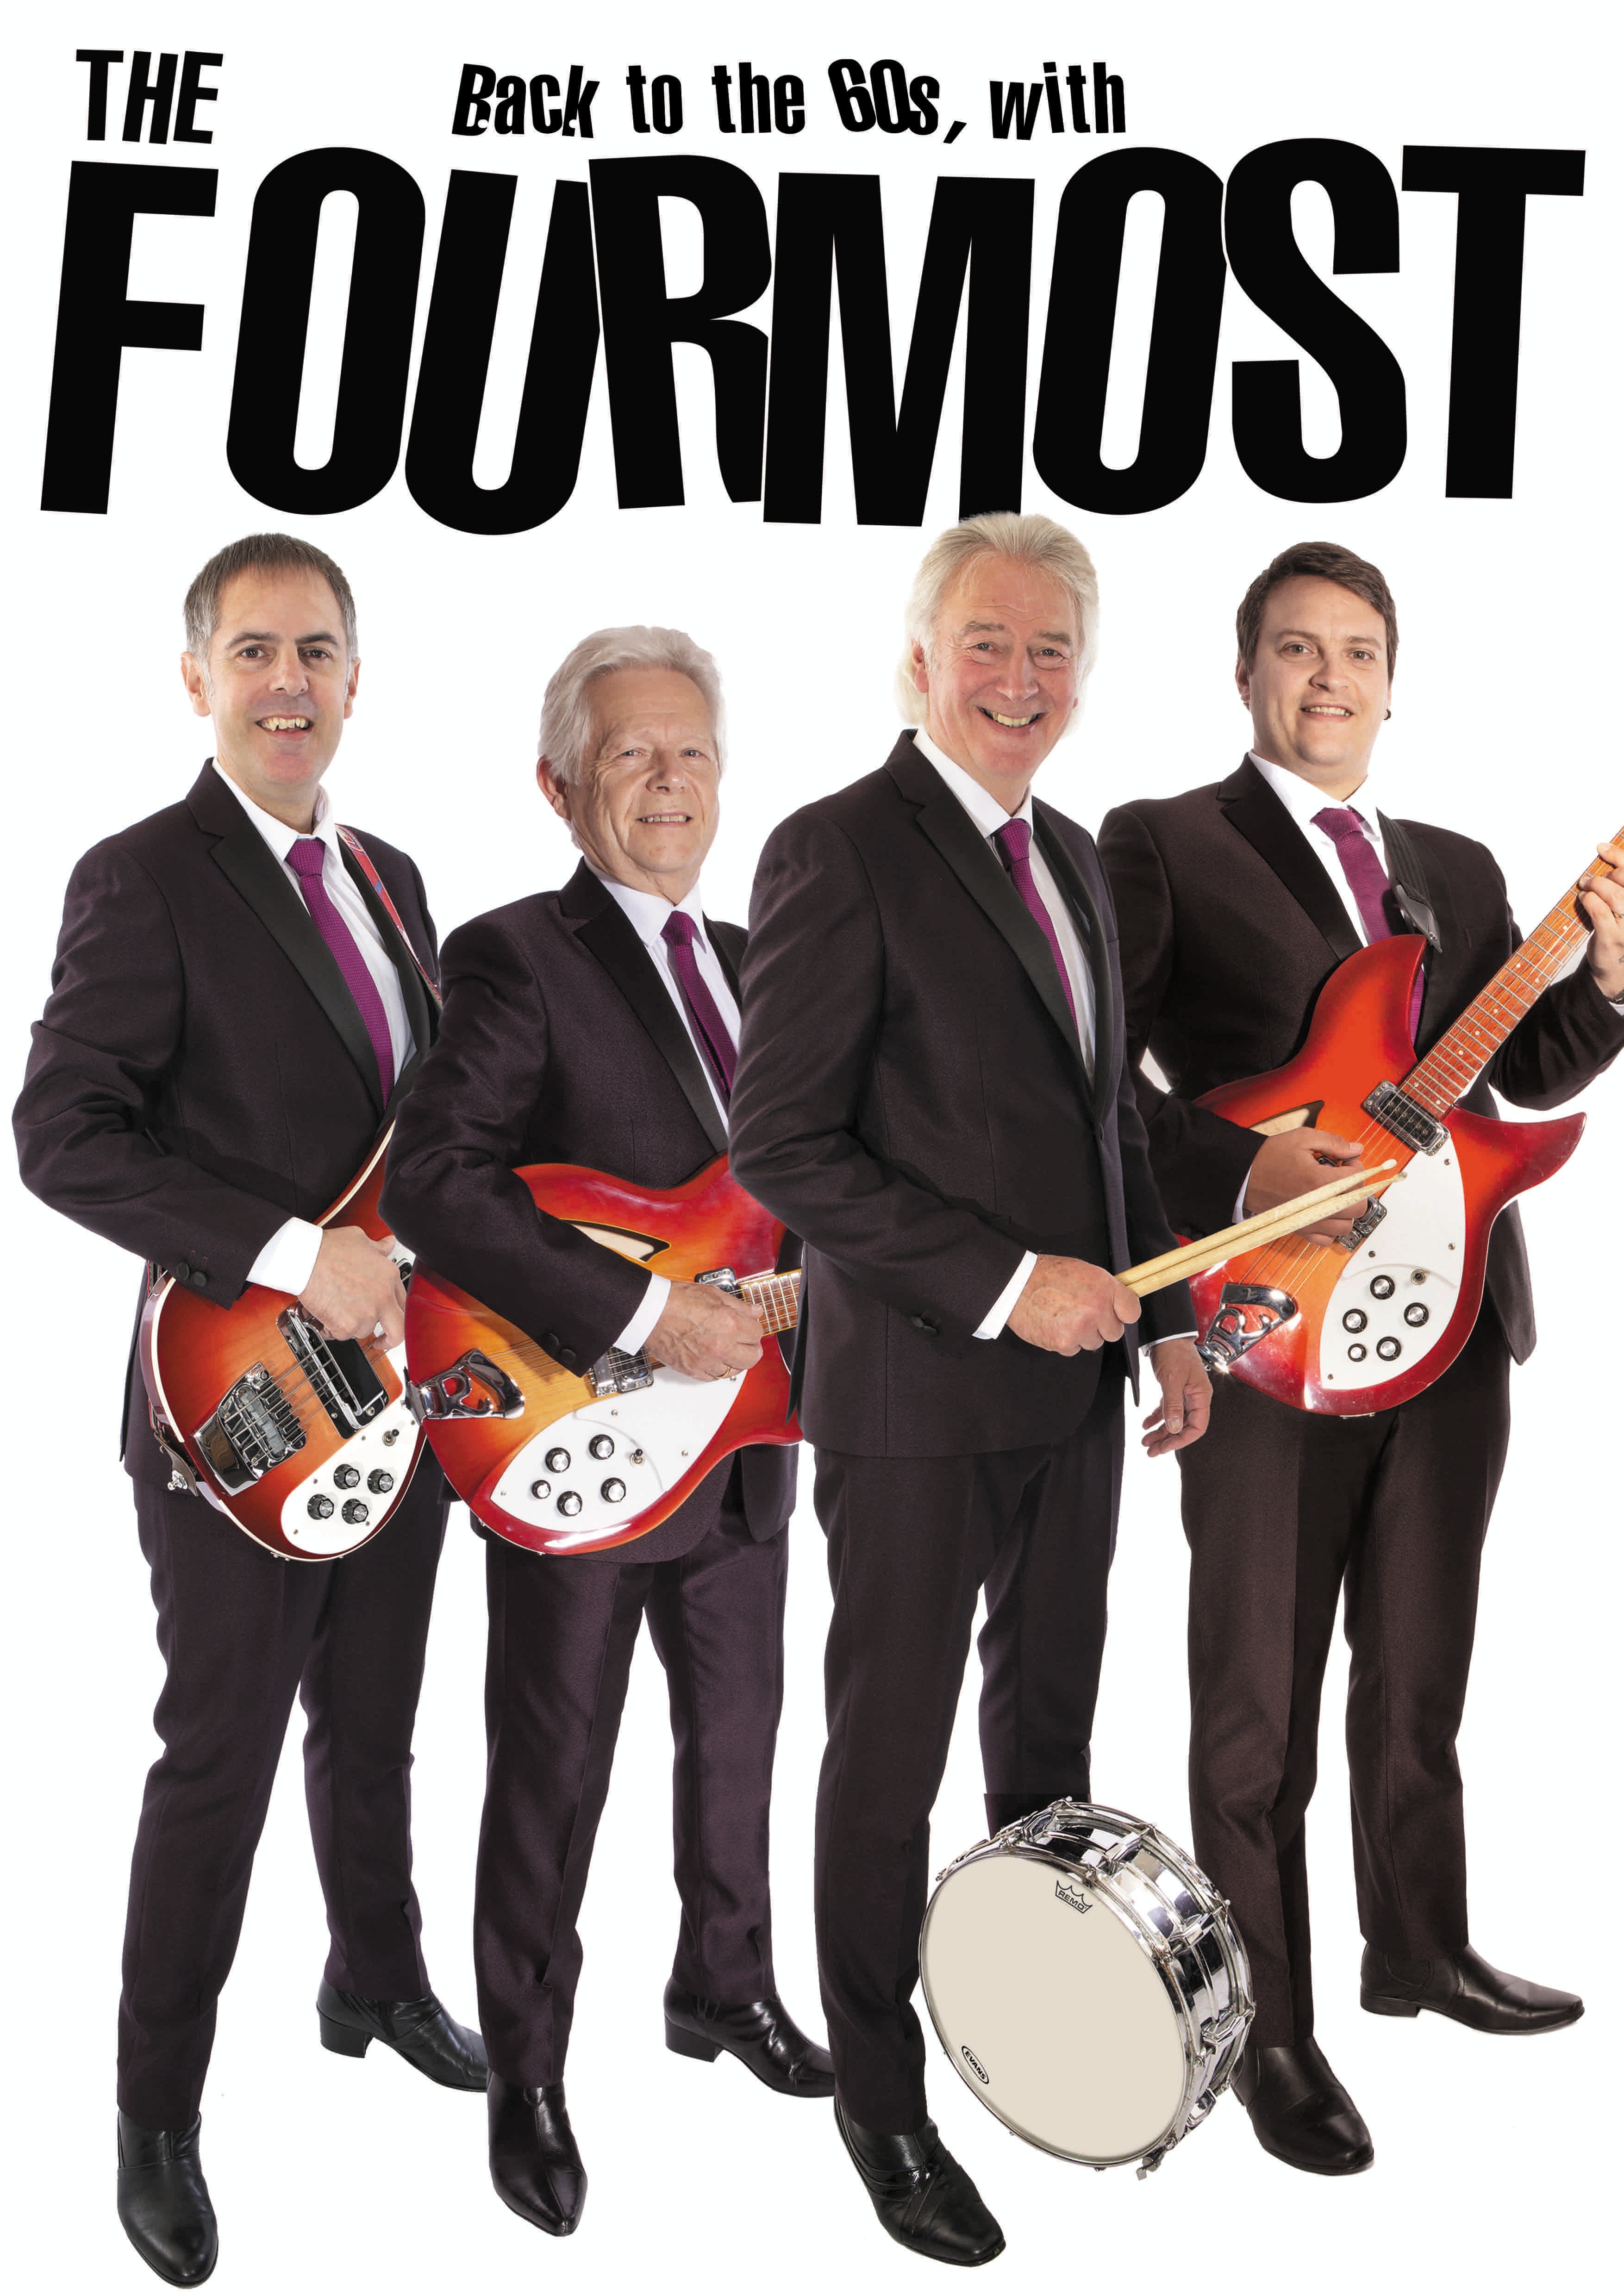 Book the UK’s most authentic 60s band, The Fourmost!!!